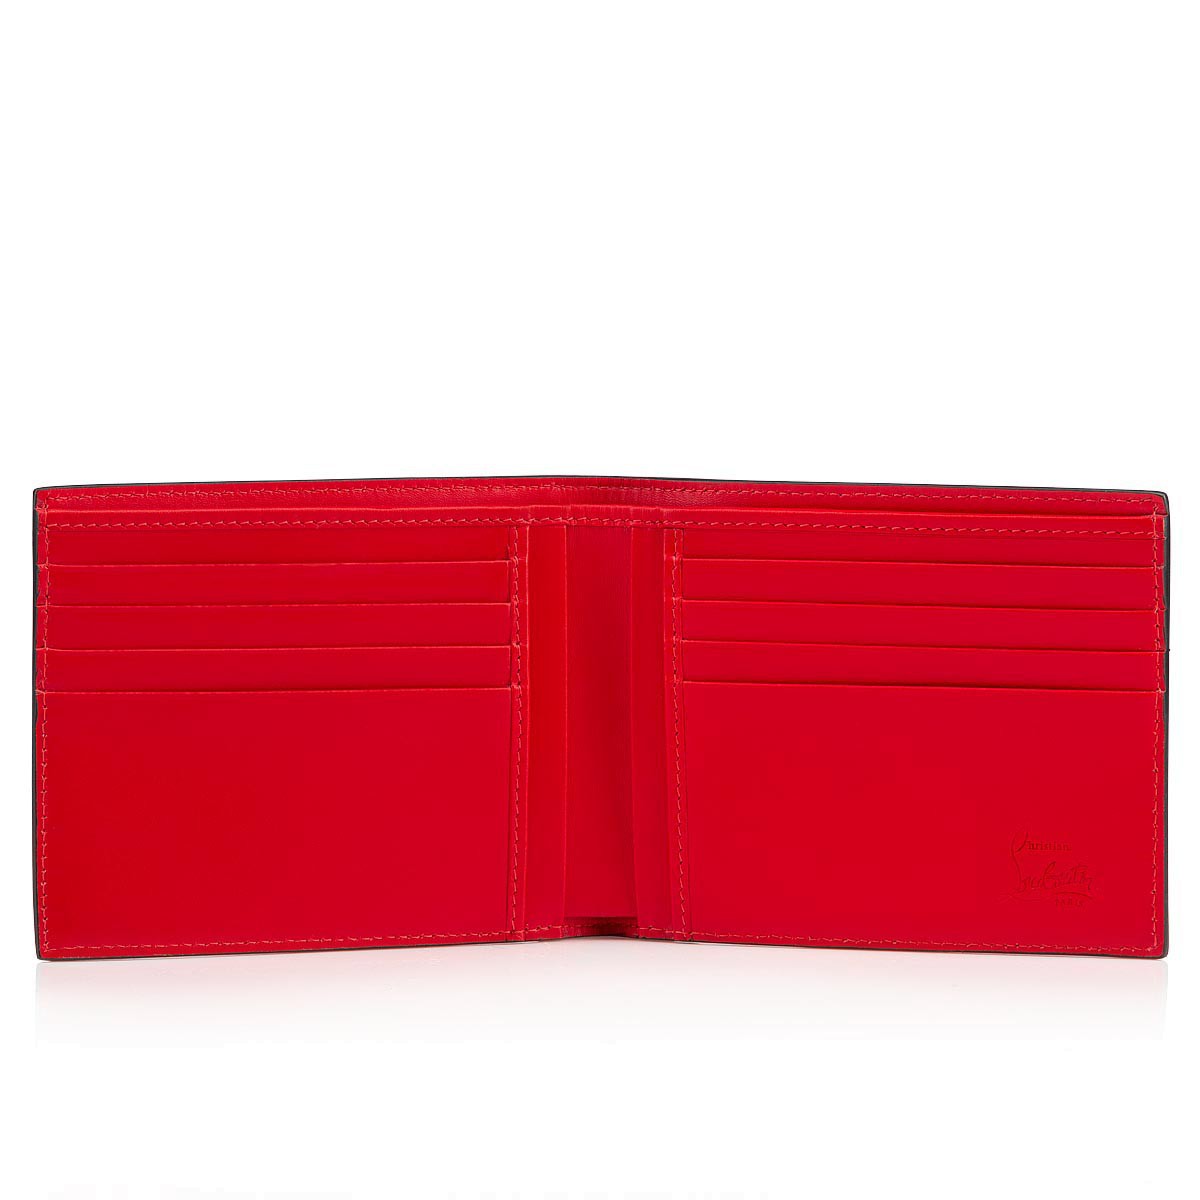 Accessories - Coolcard - Christian Louboutin